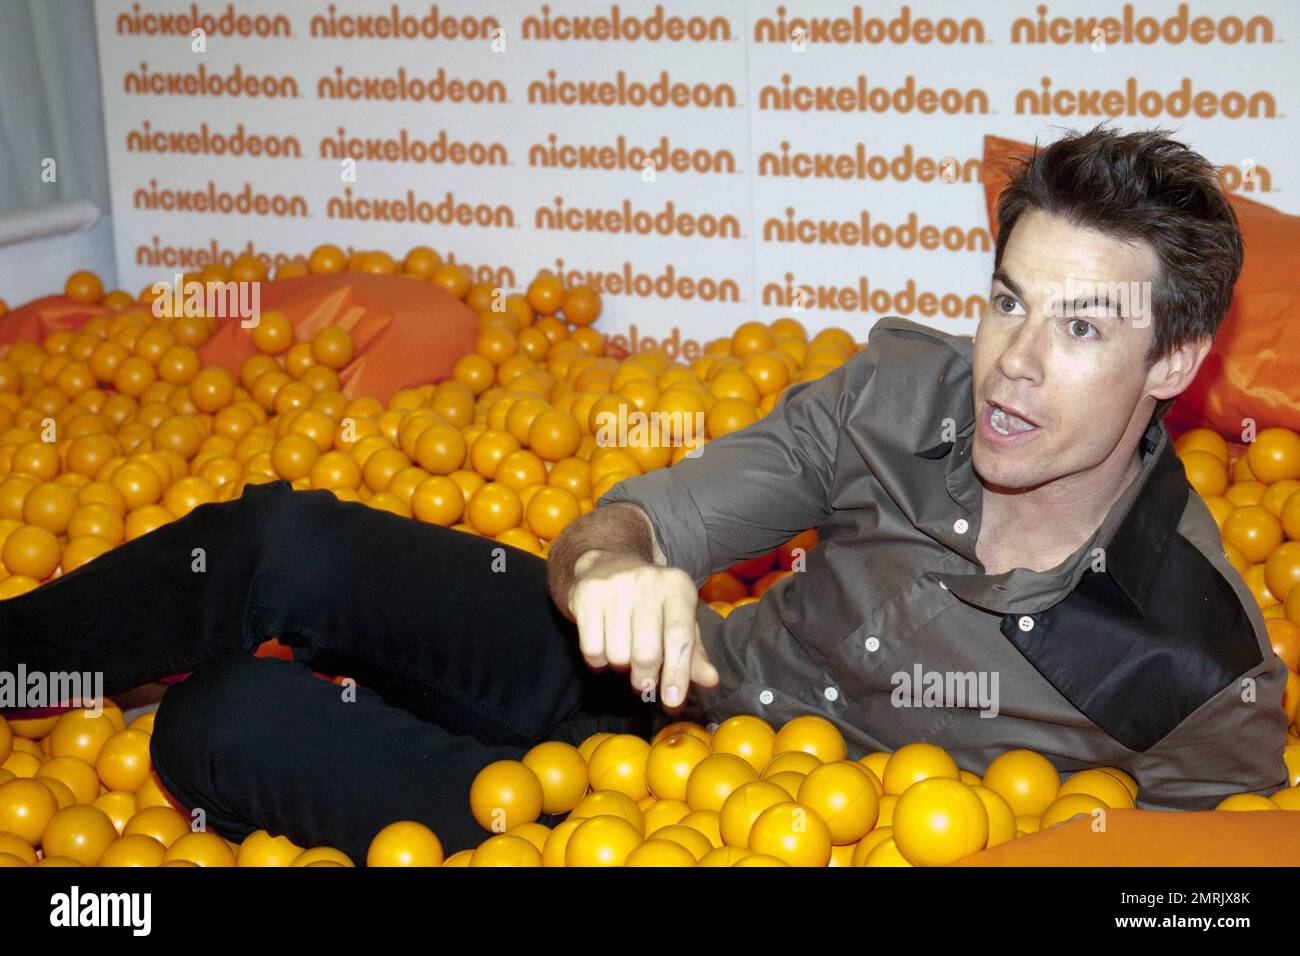 Host of Nickelodeon Australia's Kids Choice Awards 2010, US actor Jerry Trainor clowns around in a ball pit with Miss Singapore finalist Karen Wong prior to the event. Sydney, Australia. 10/8/10. Stock Photo